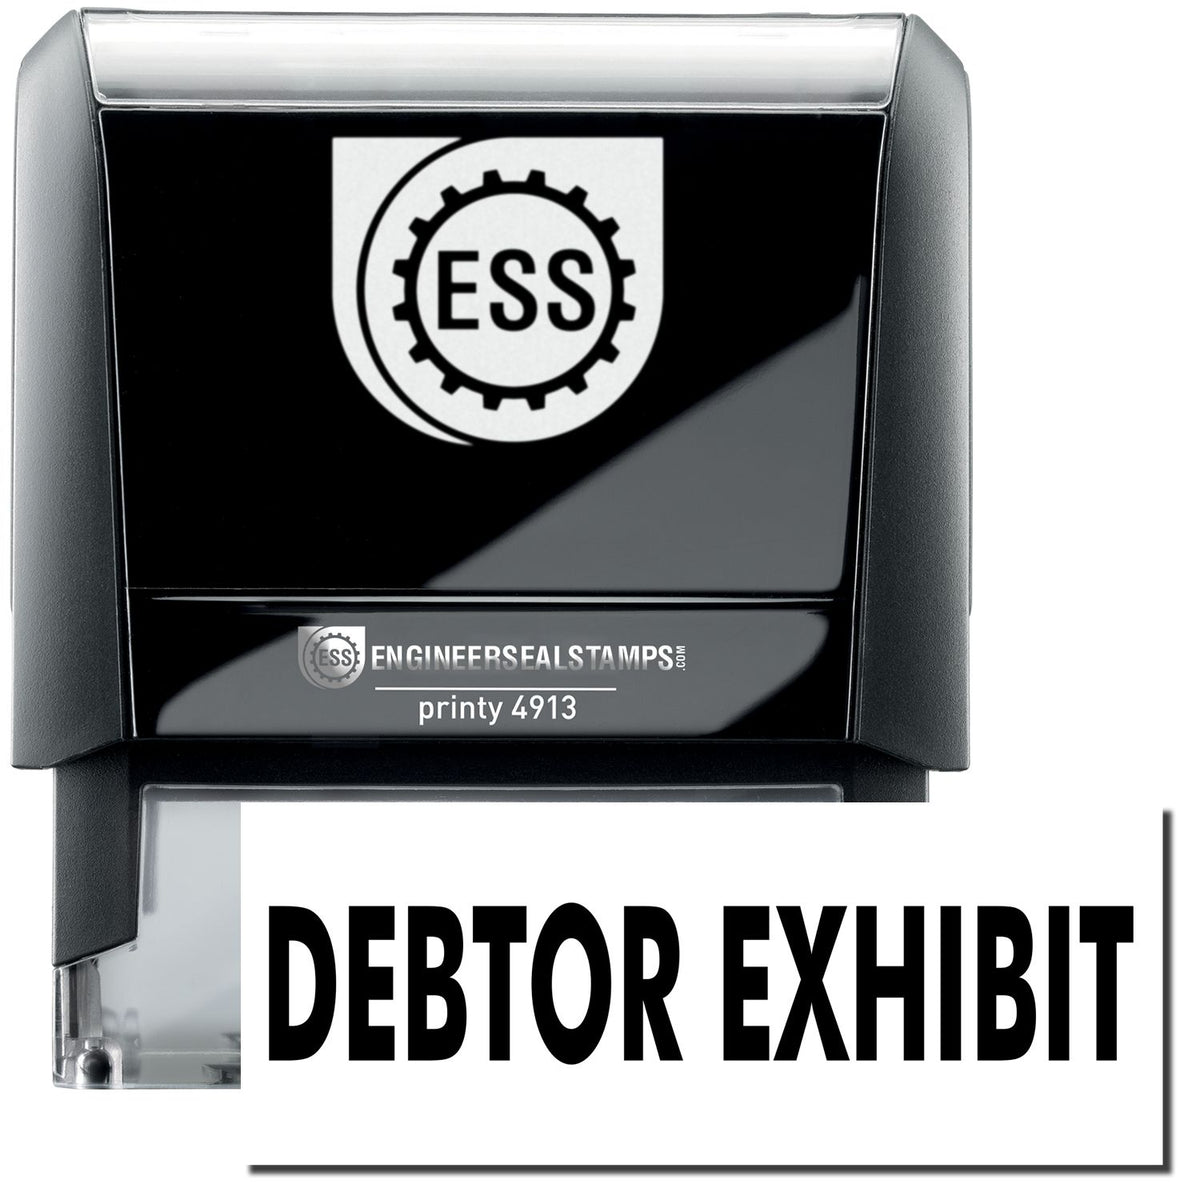 A self-inking stamp with a stamped image showing how the text &quot;DEBTOR EXHIBIT&quot; in a large bold font is displayed by it.